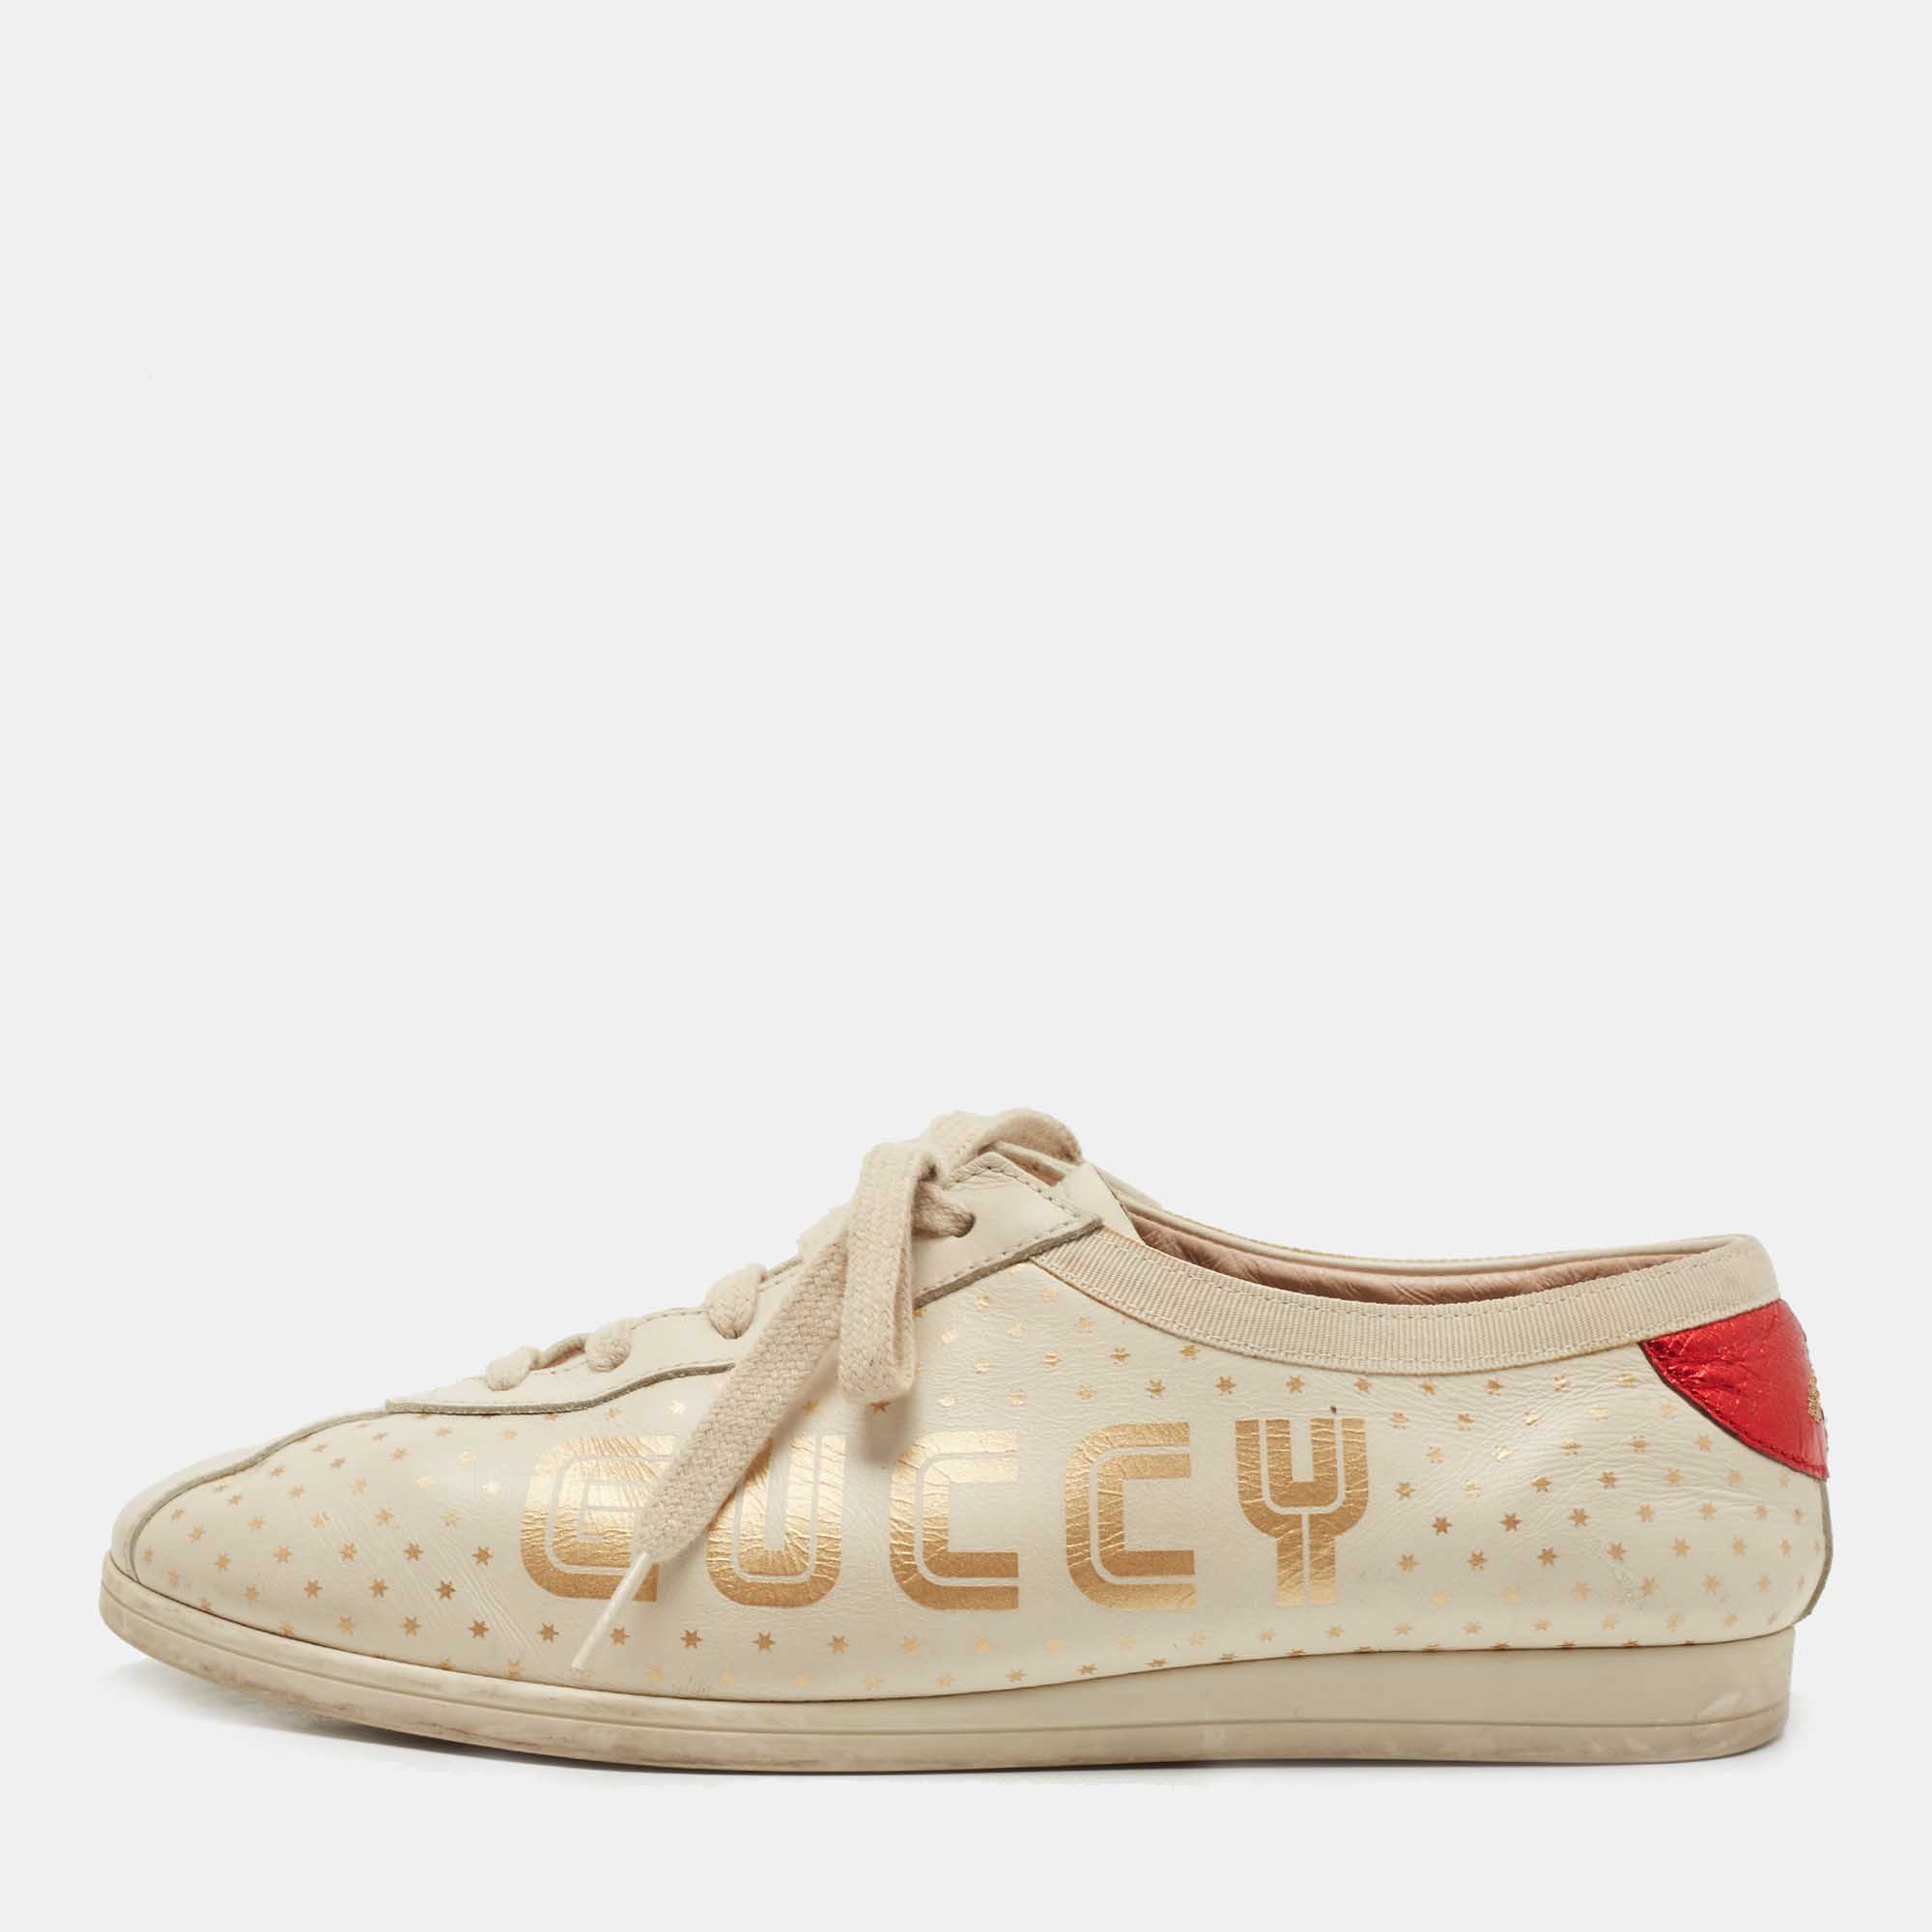 Pre-owned Gucci Beige Leather Falacer Guccy Sneakers Size 37